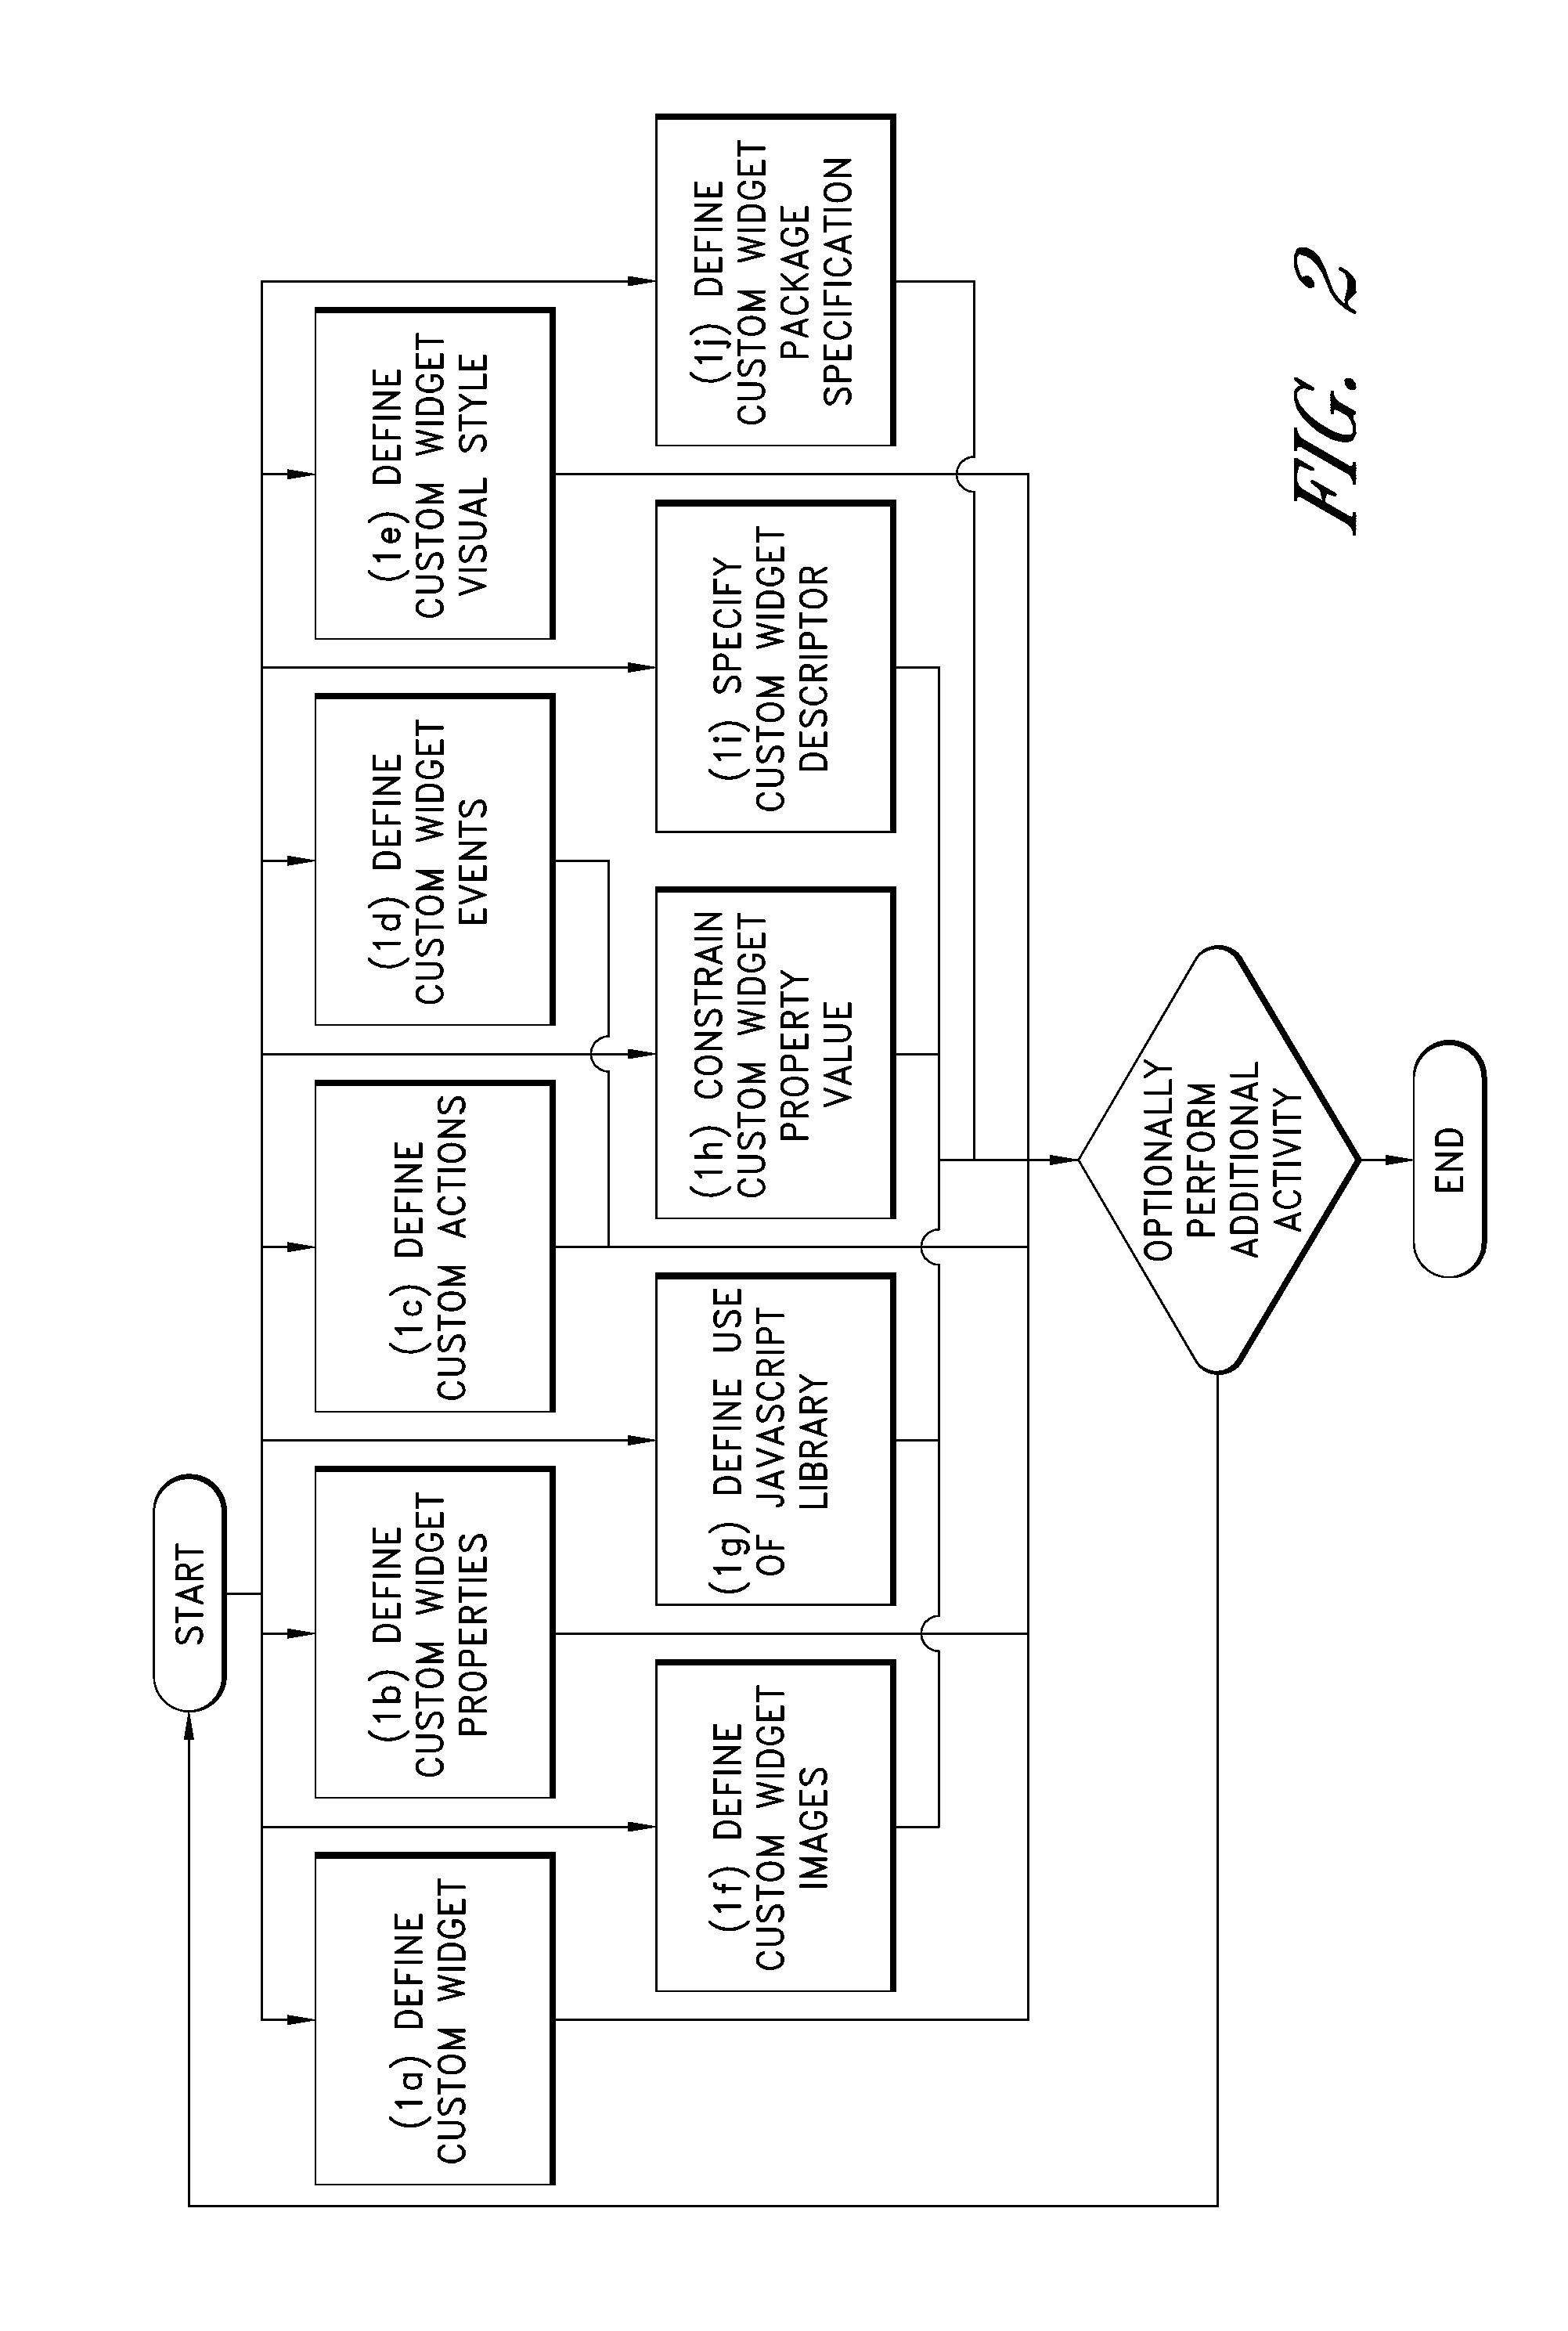 System and method for extending a visualization platform